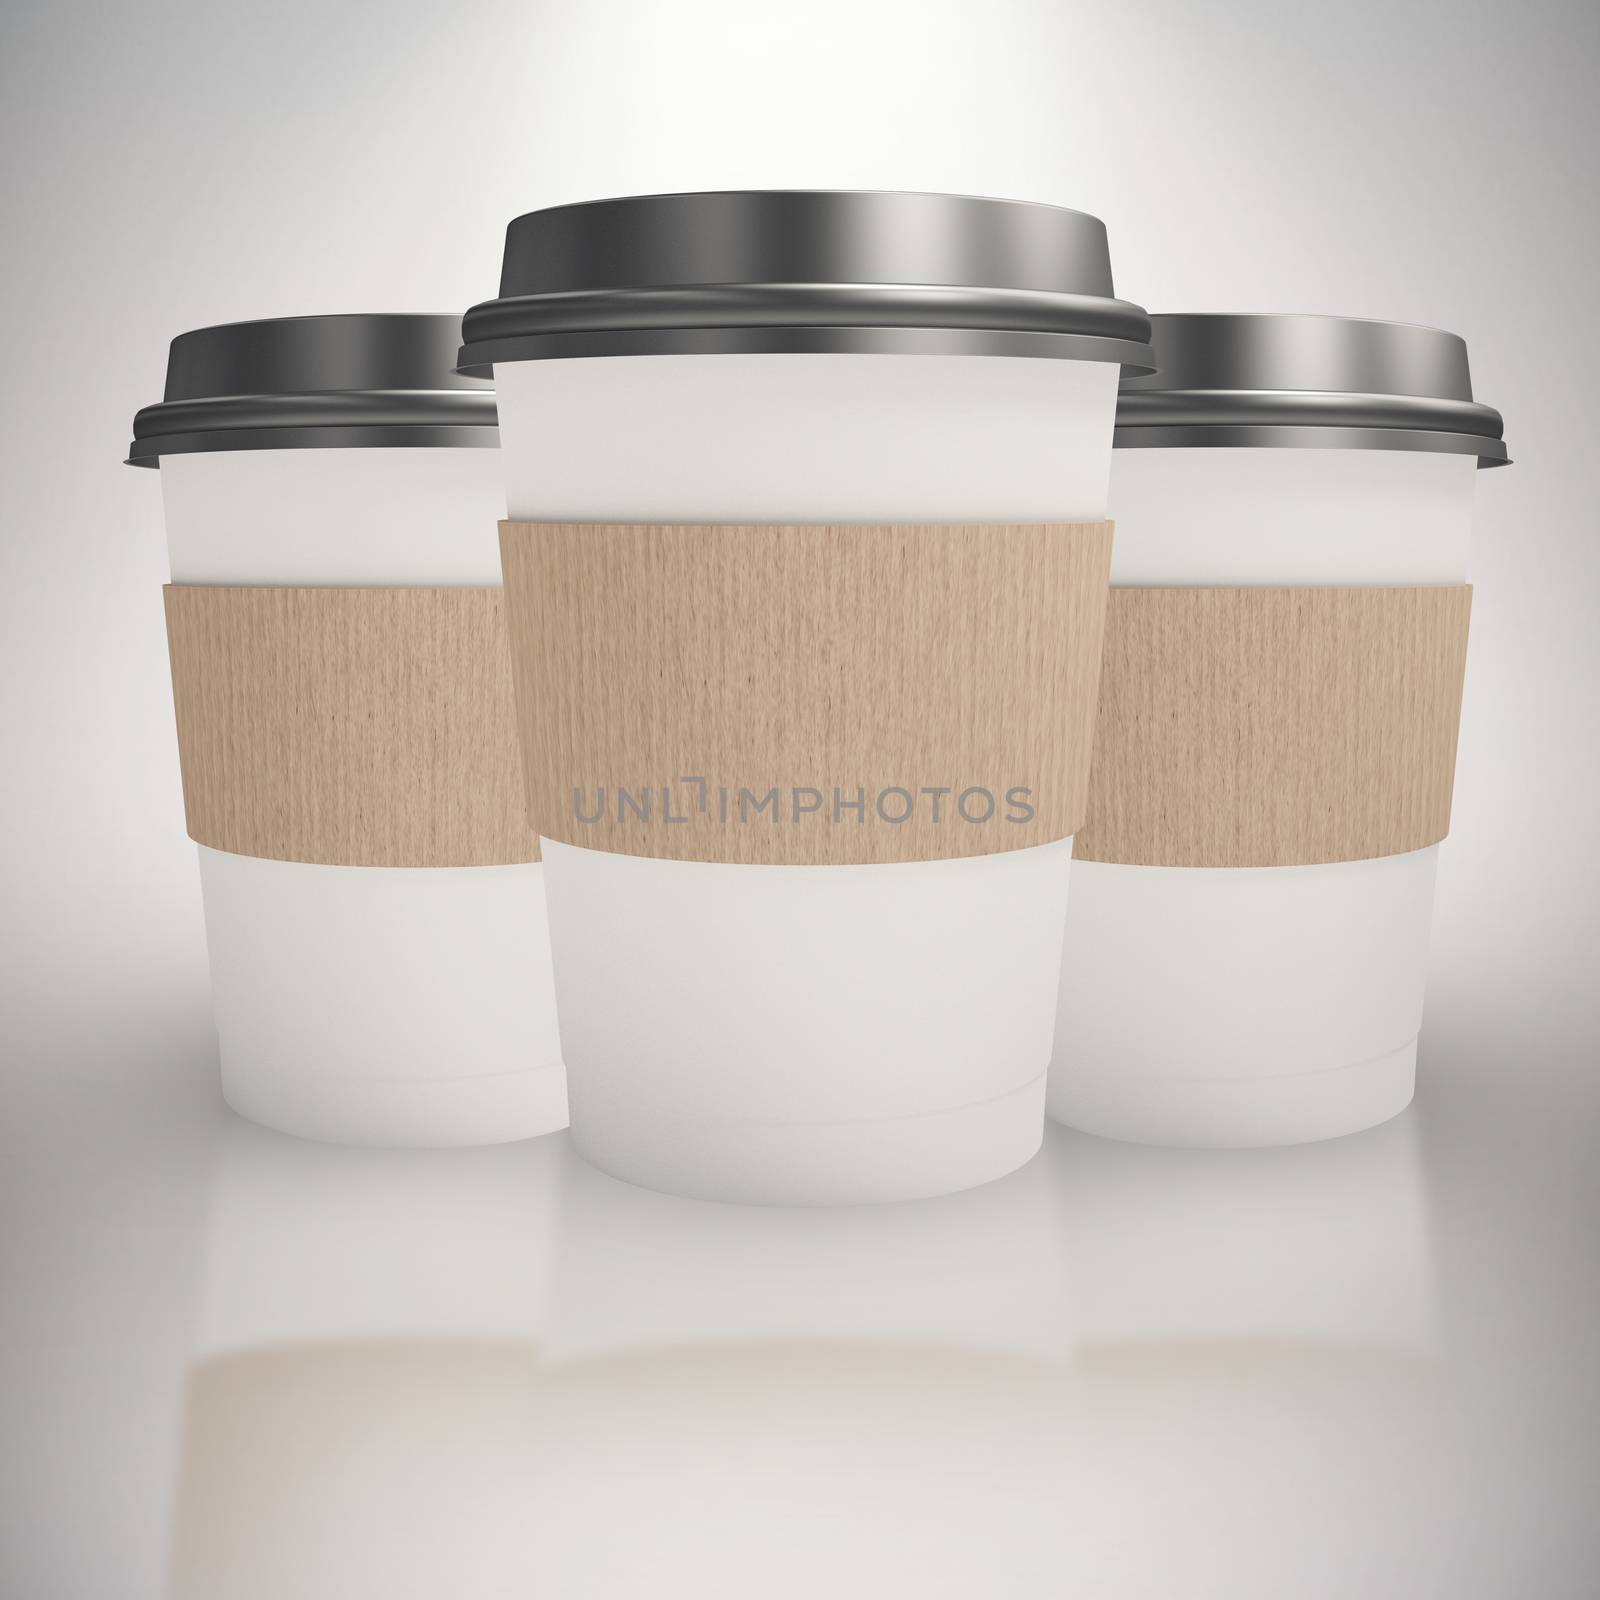 White cup over white background against grey background